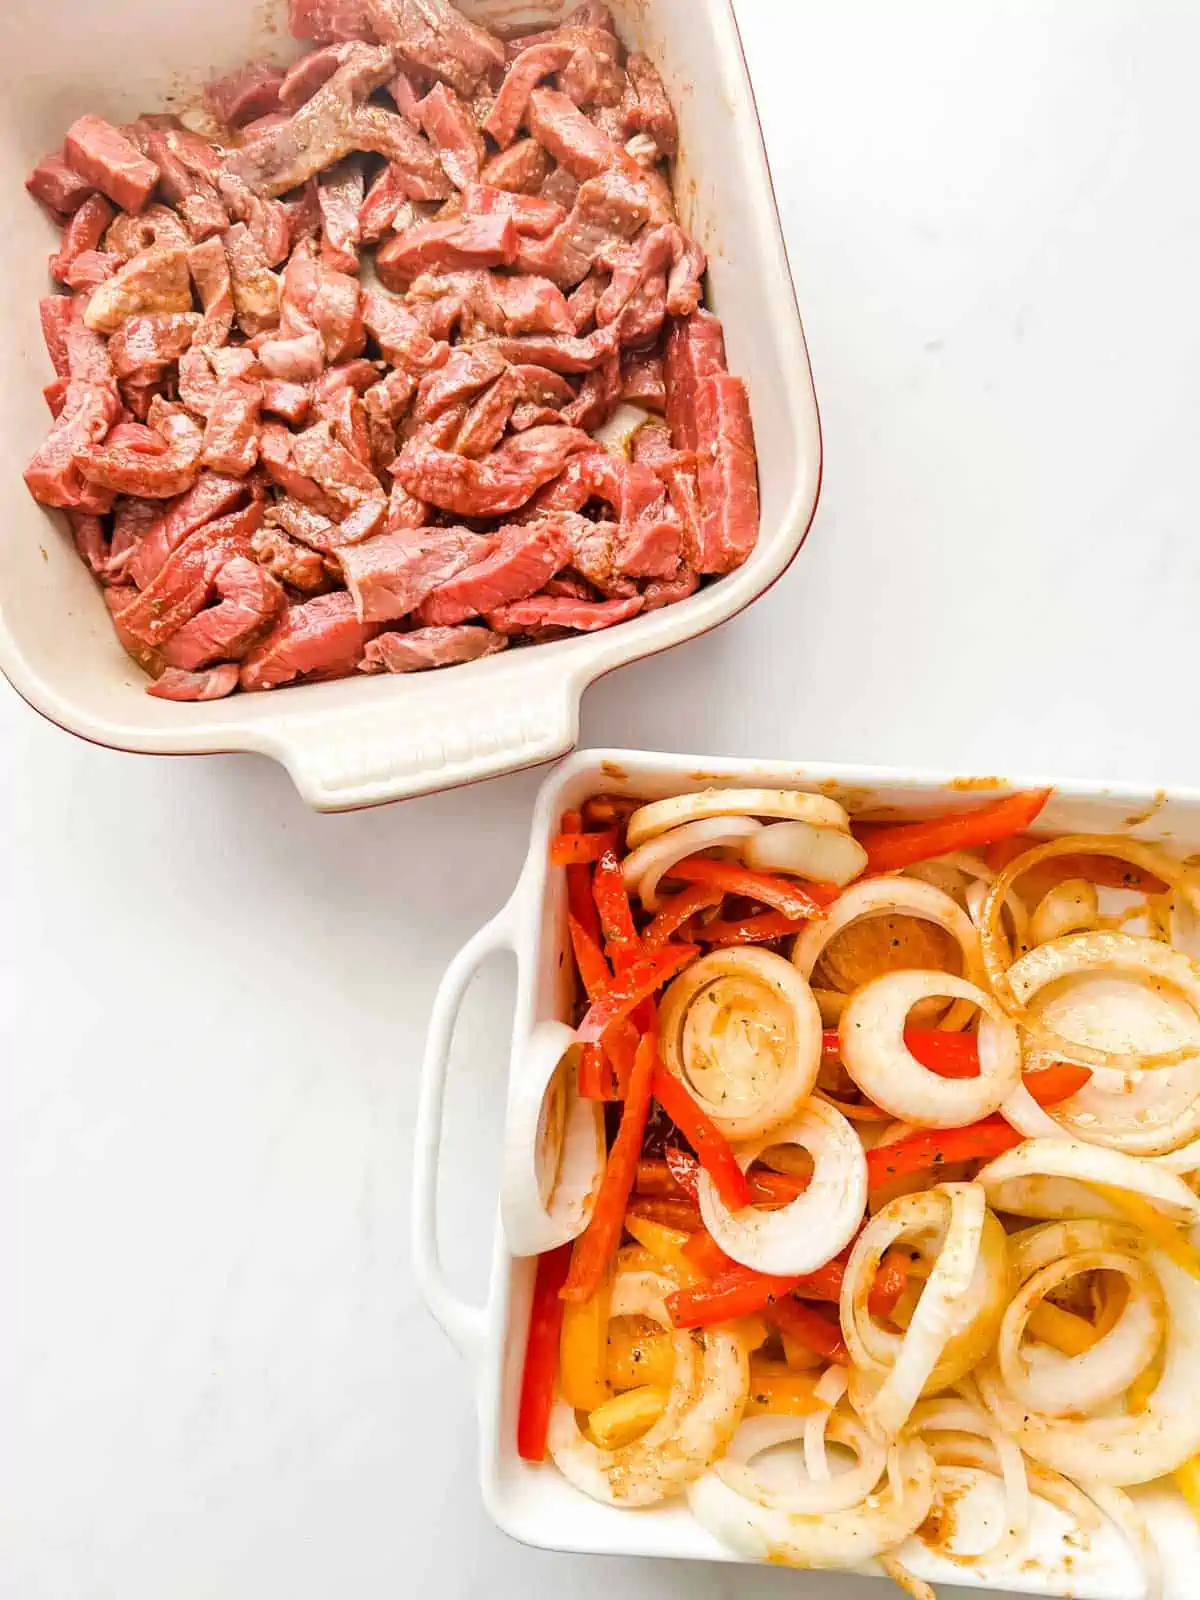 A shallow dish of sliced steak in marinade and sliced onions and peppers.